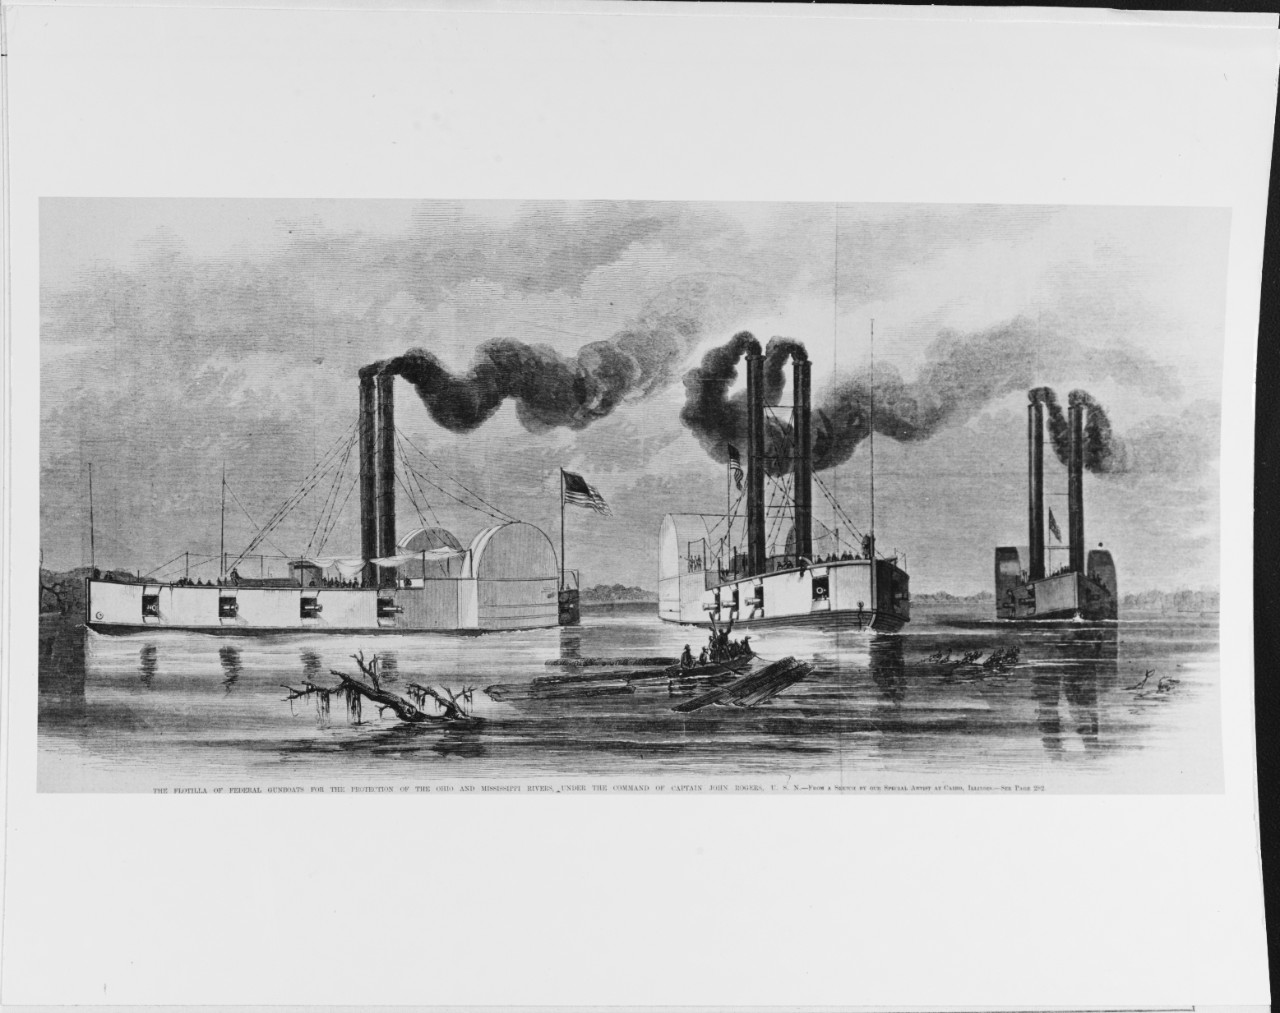 Photo #: NH 59004  &quot;The Flotilla of Federal Gunboats for the Protection of the Ohio and Mississippi Rivers, Under the Command of Captain John Rodgers, U.S.N. -- From a Sketch by our Special Artist at Cairo, Illinois&quot;